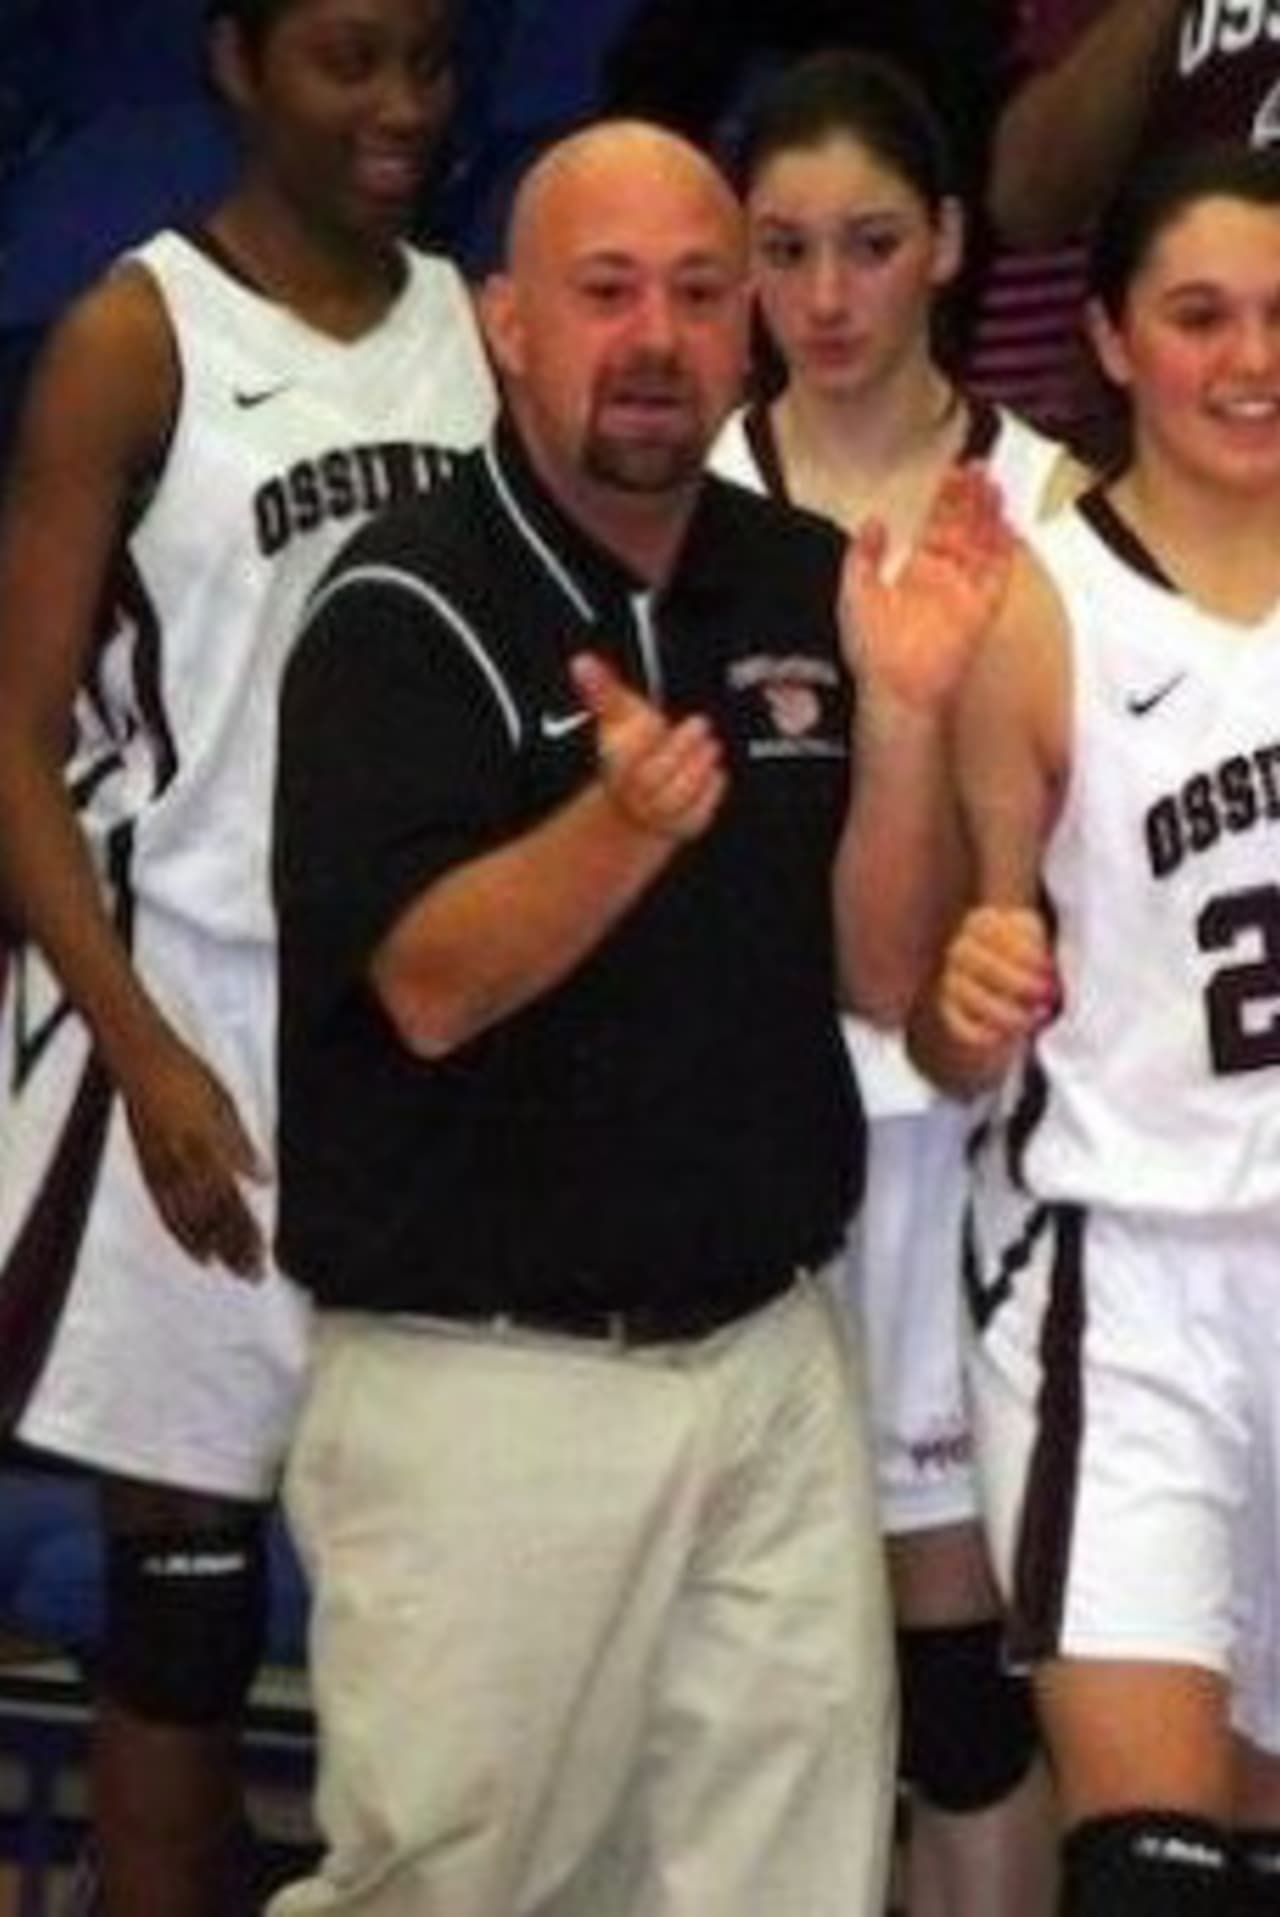 Ossining High School girls basketball coach Dan Ricci was named the New York Coach of the Year by USA Today.